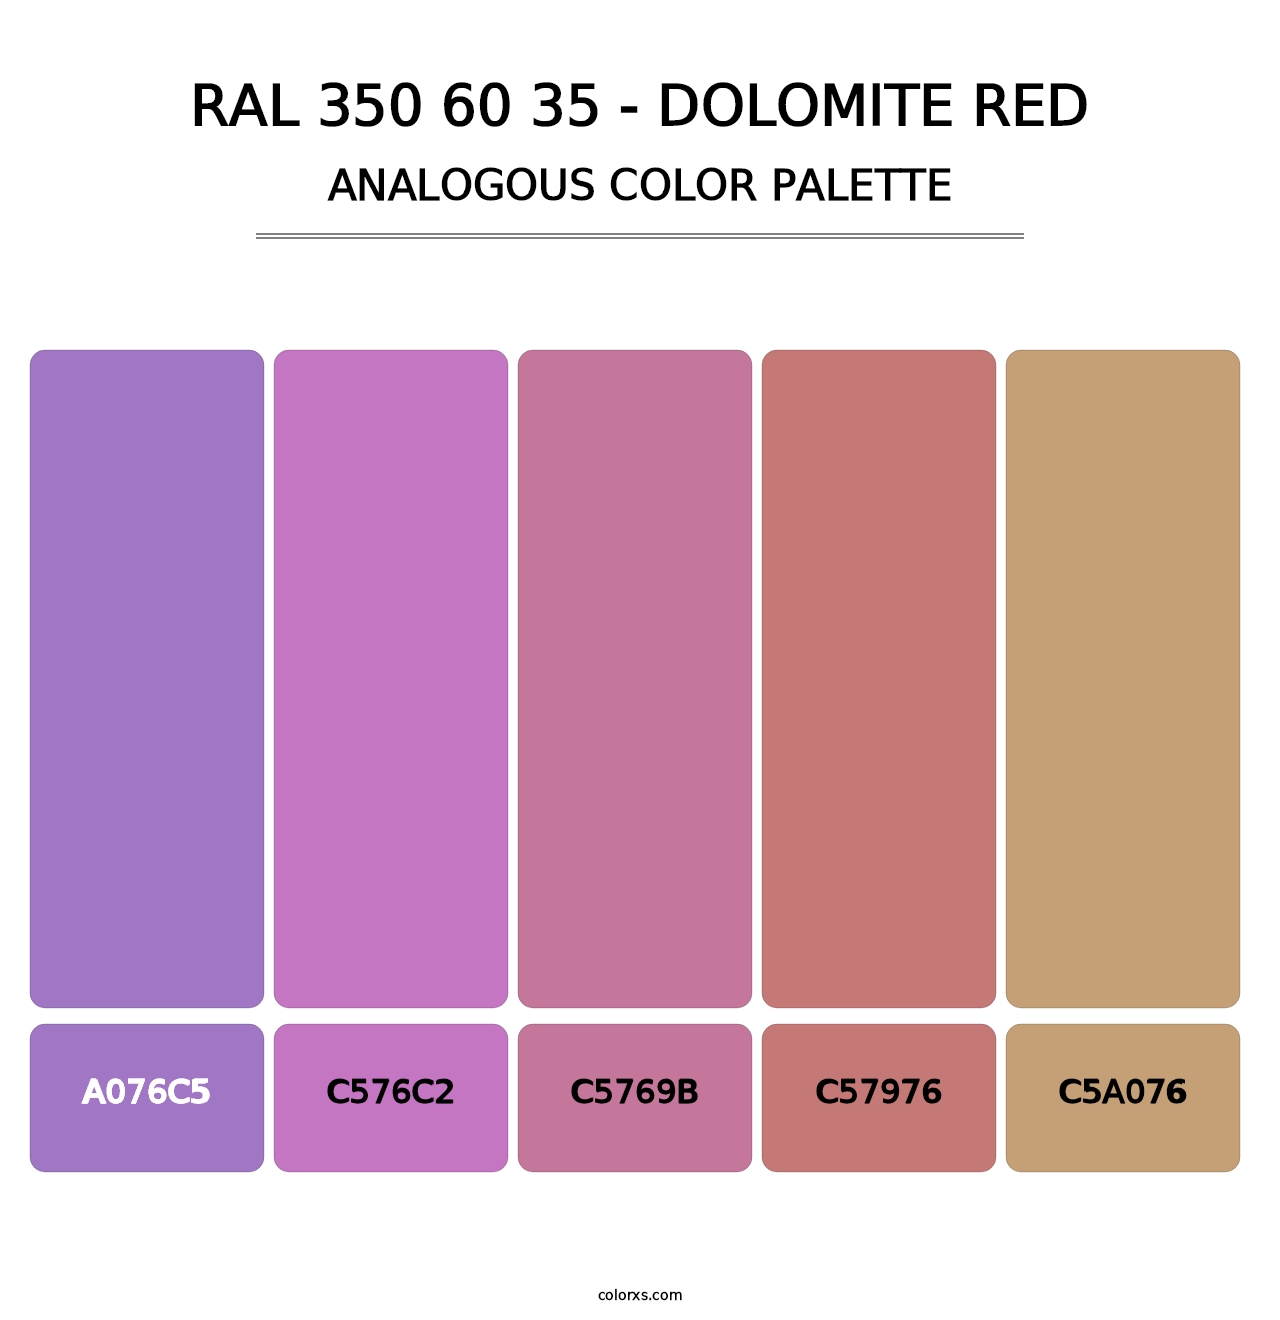 RAL 350 60 35 - Dolomite Red - Analogous Color Palette